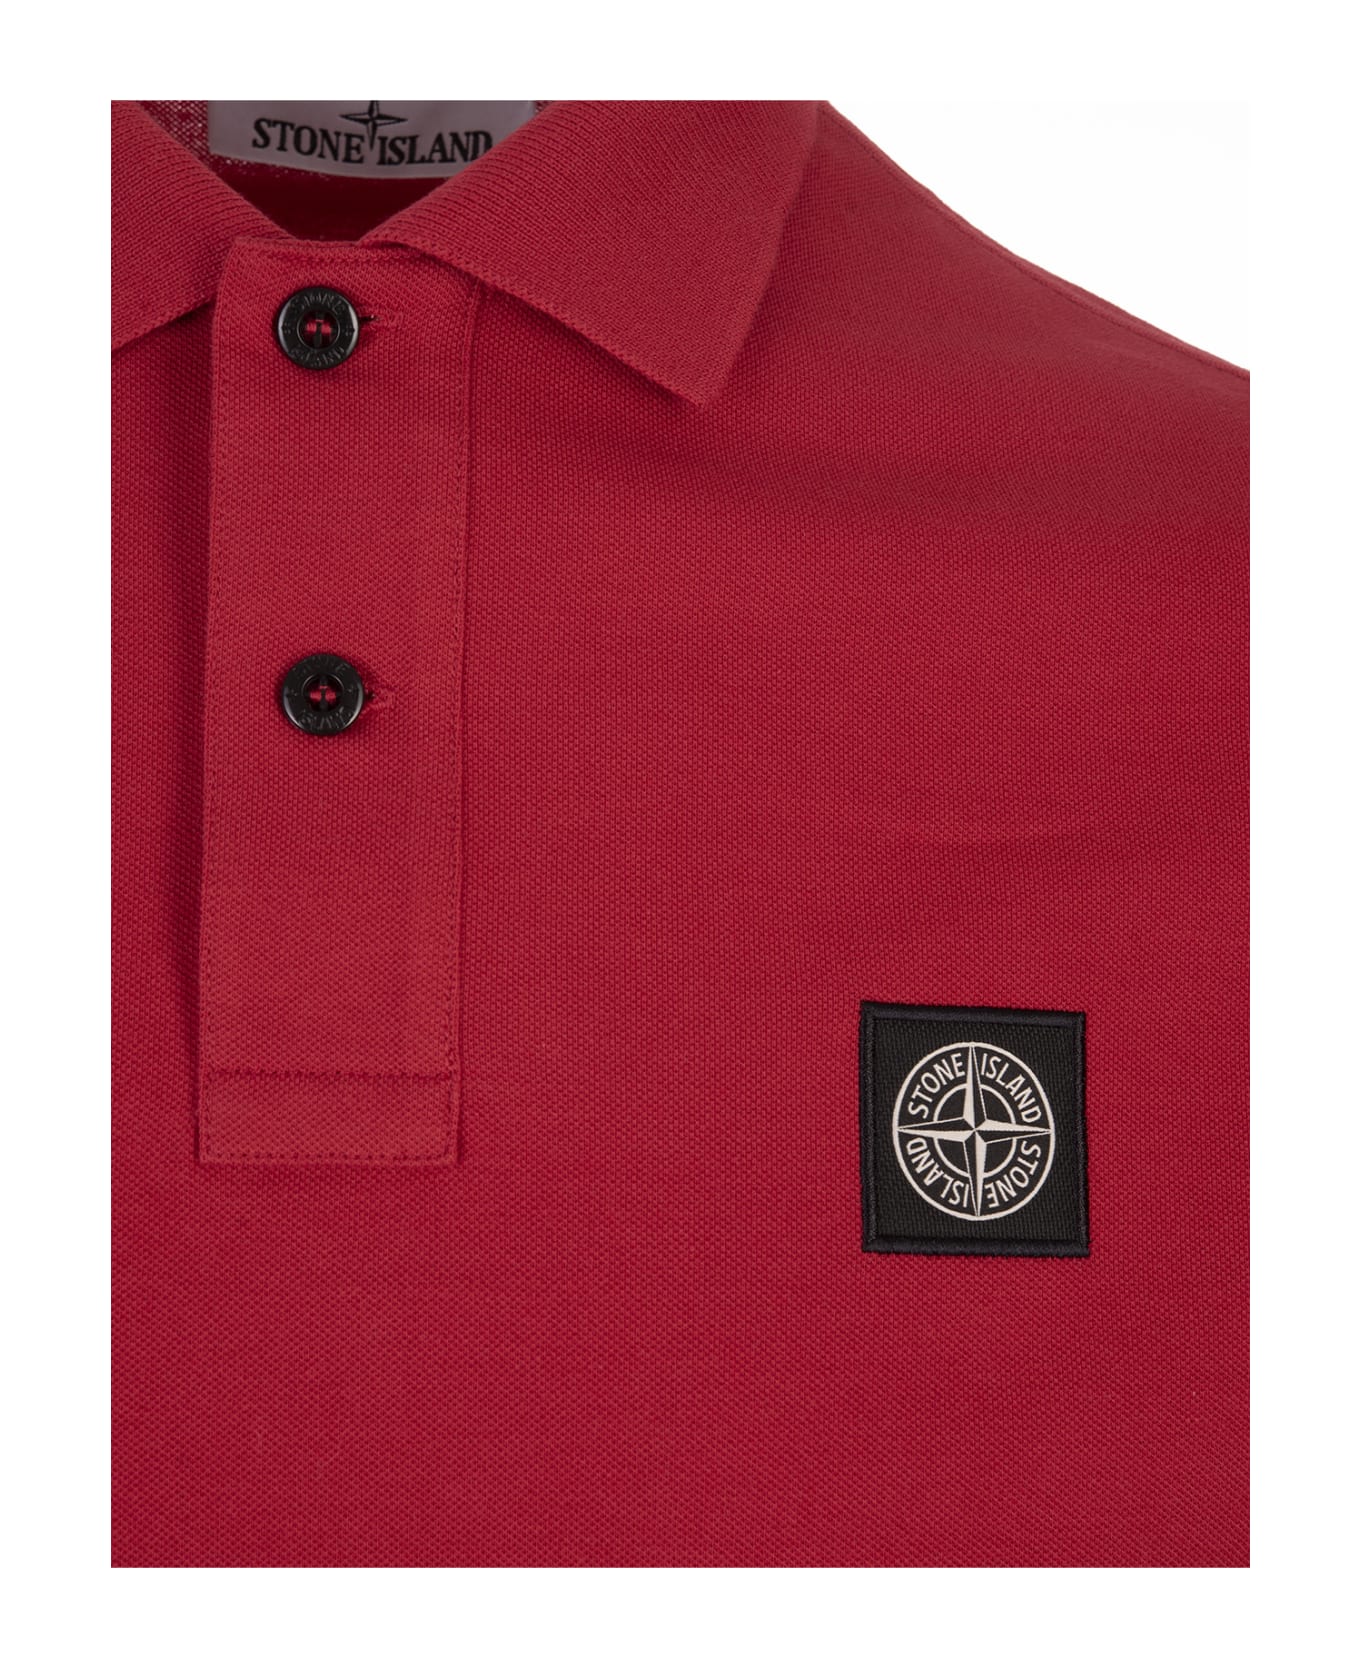 Stone Island Red Piqué Slim Fit Polo Shirt - Red ポロシャツ